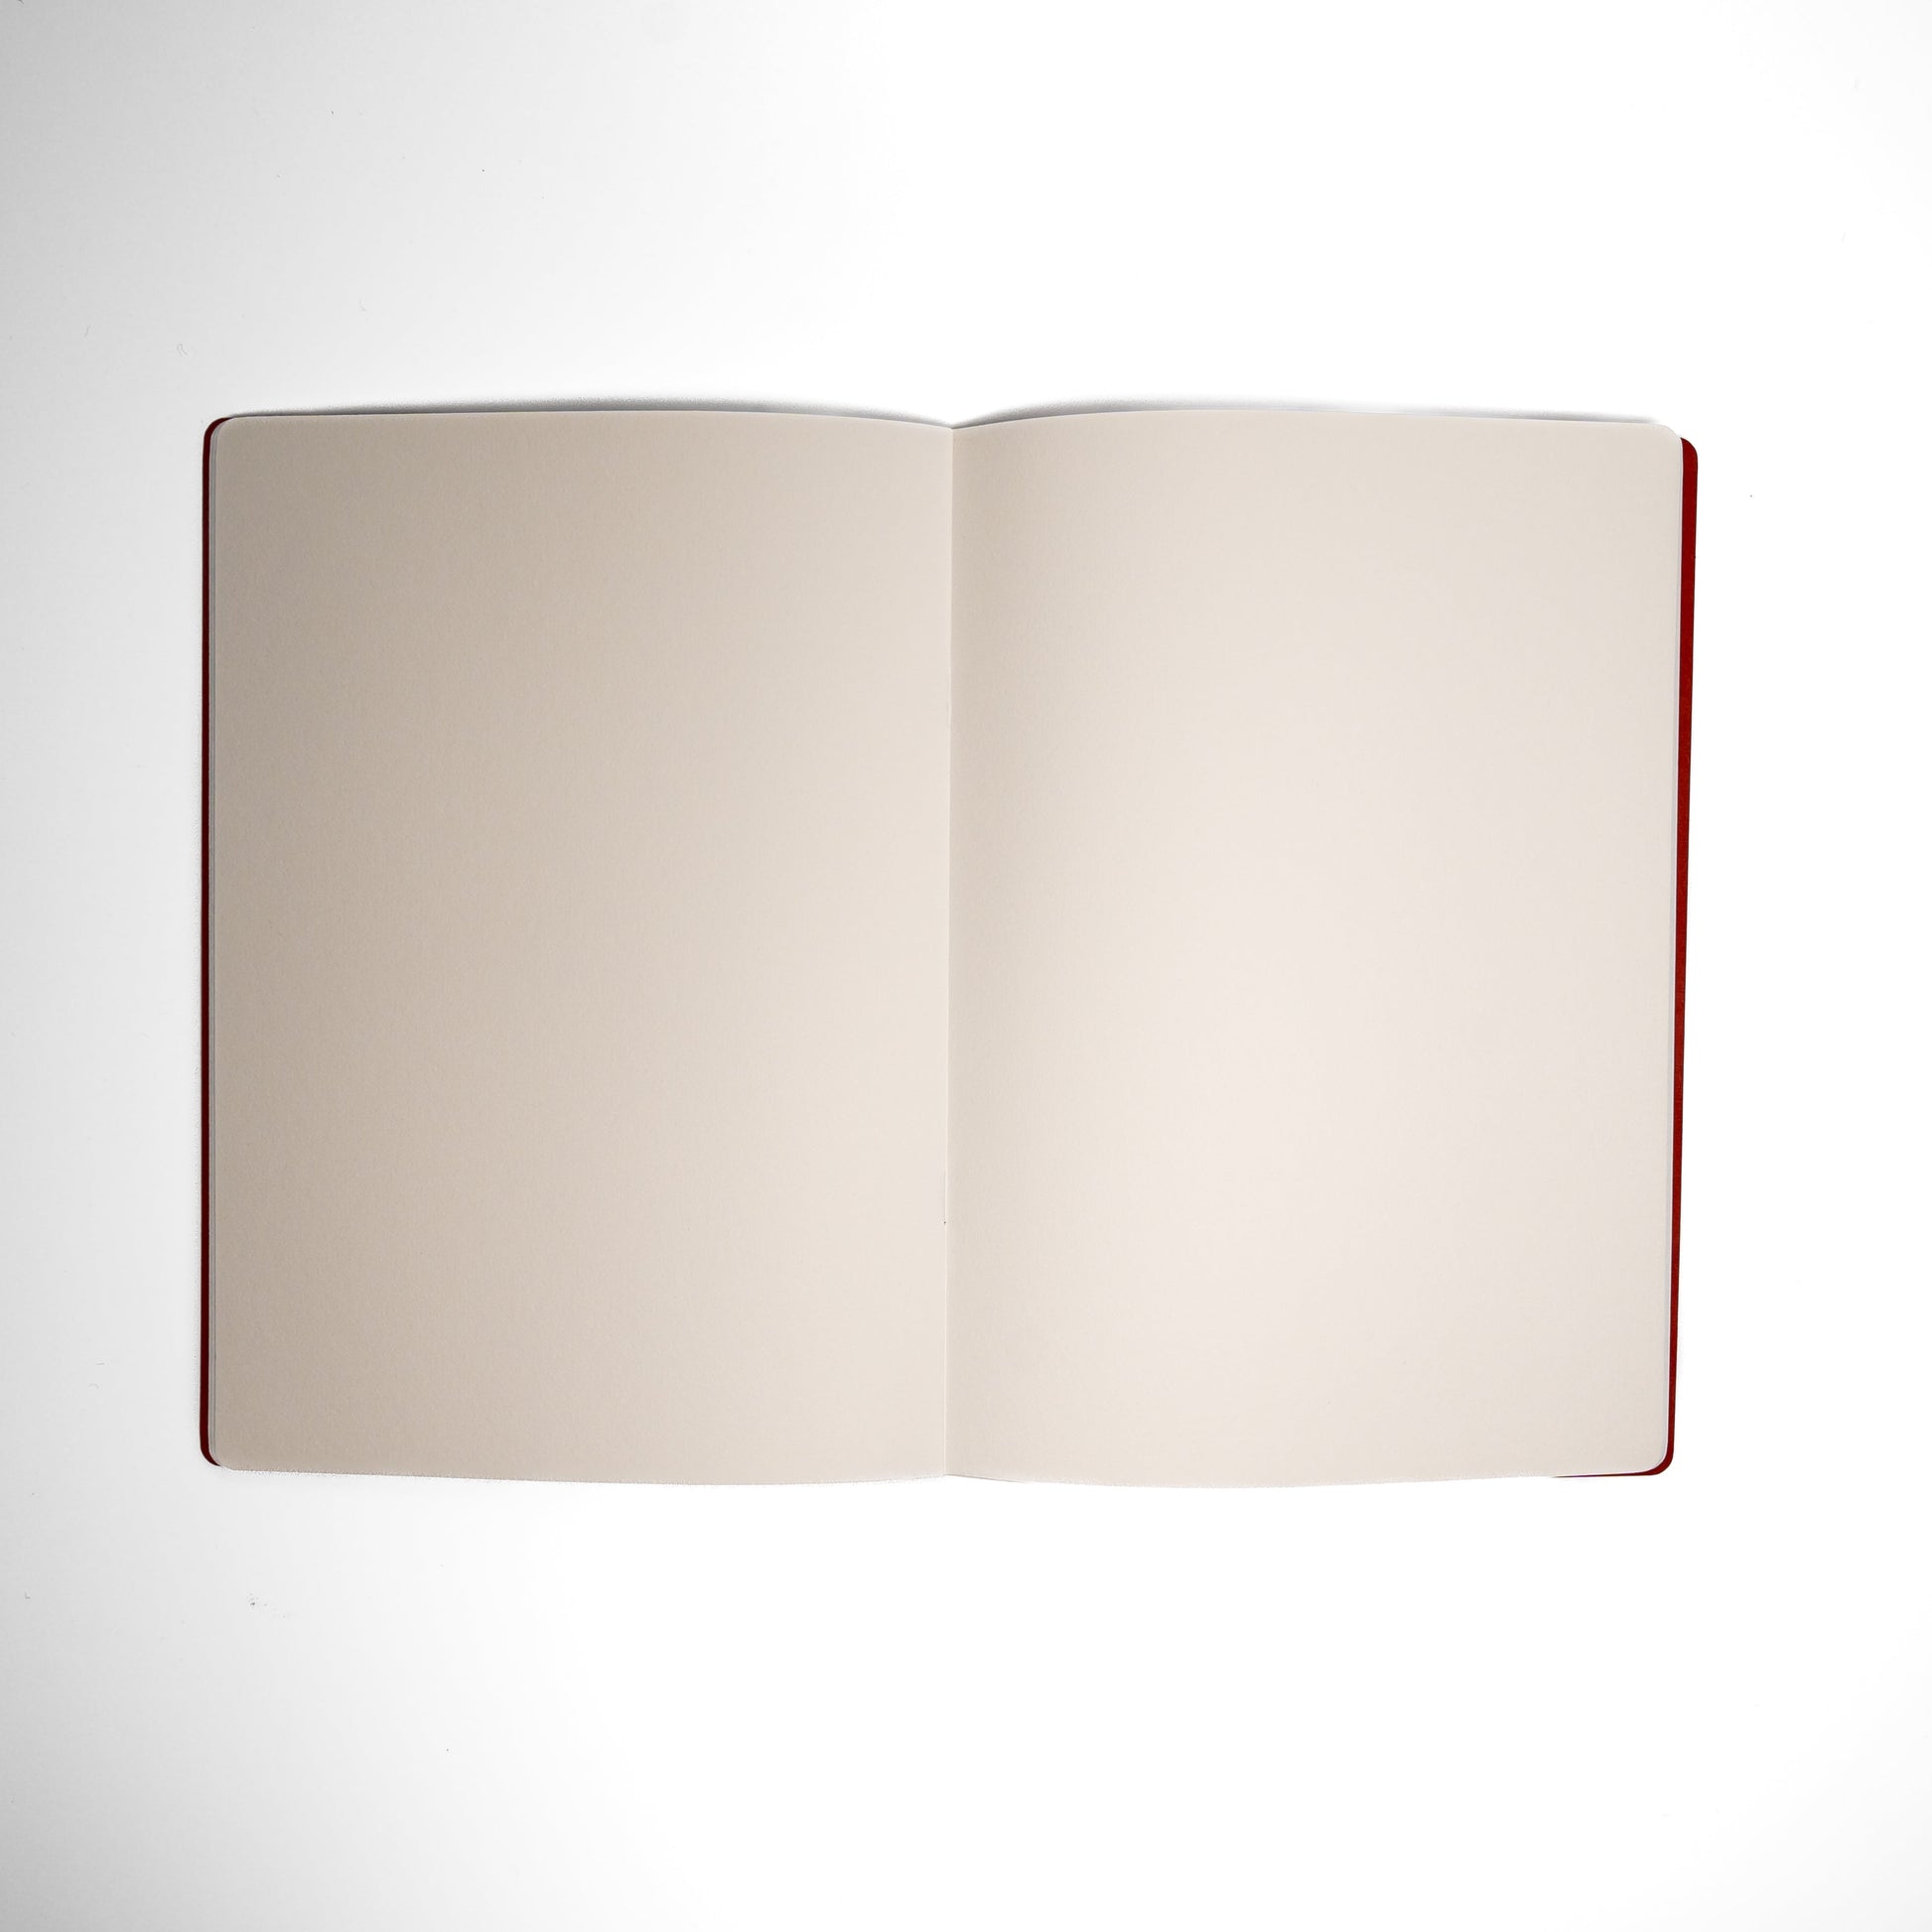 An open Awagami Factory bamboo washi paper sketchbook on a white background